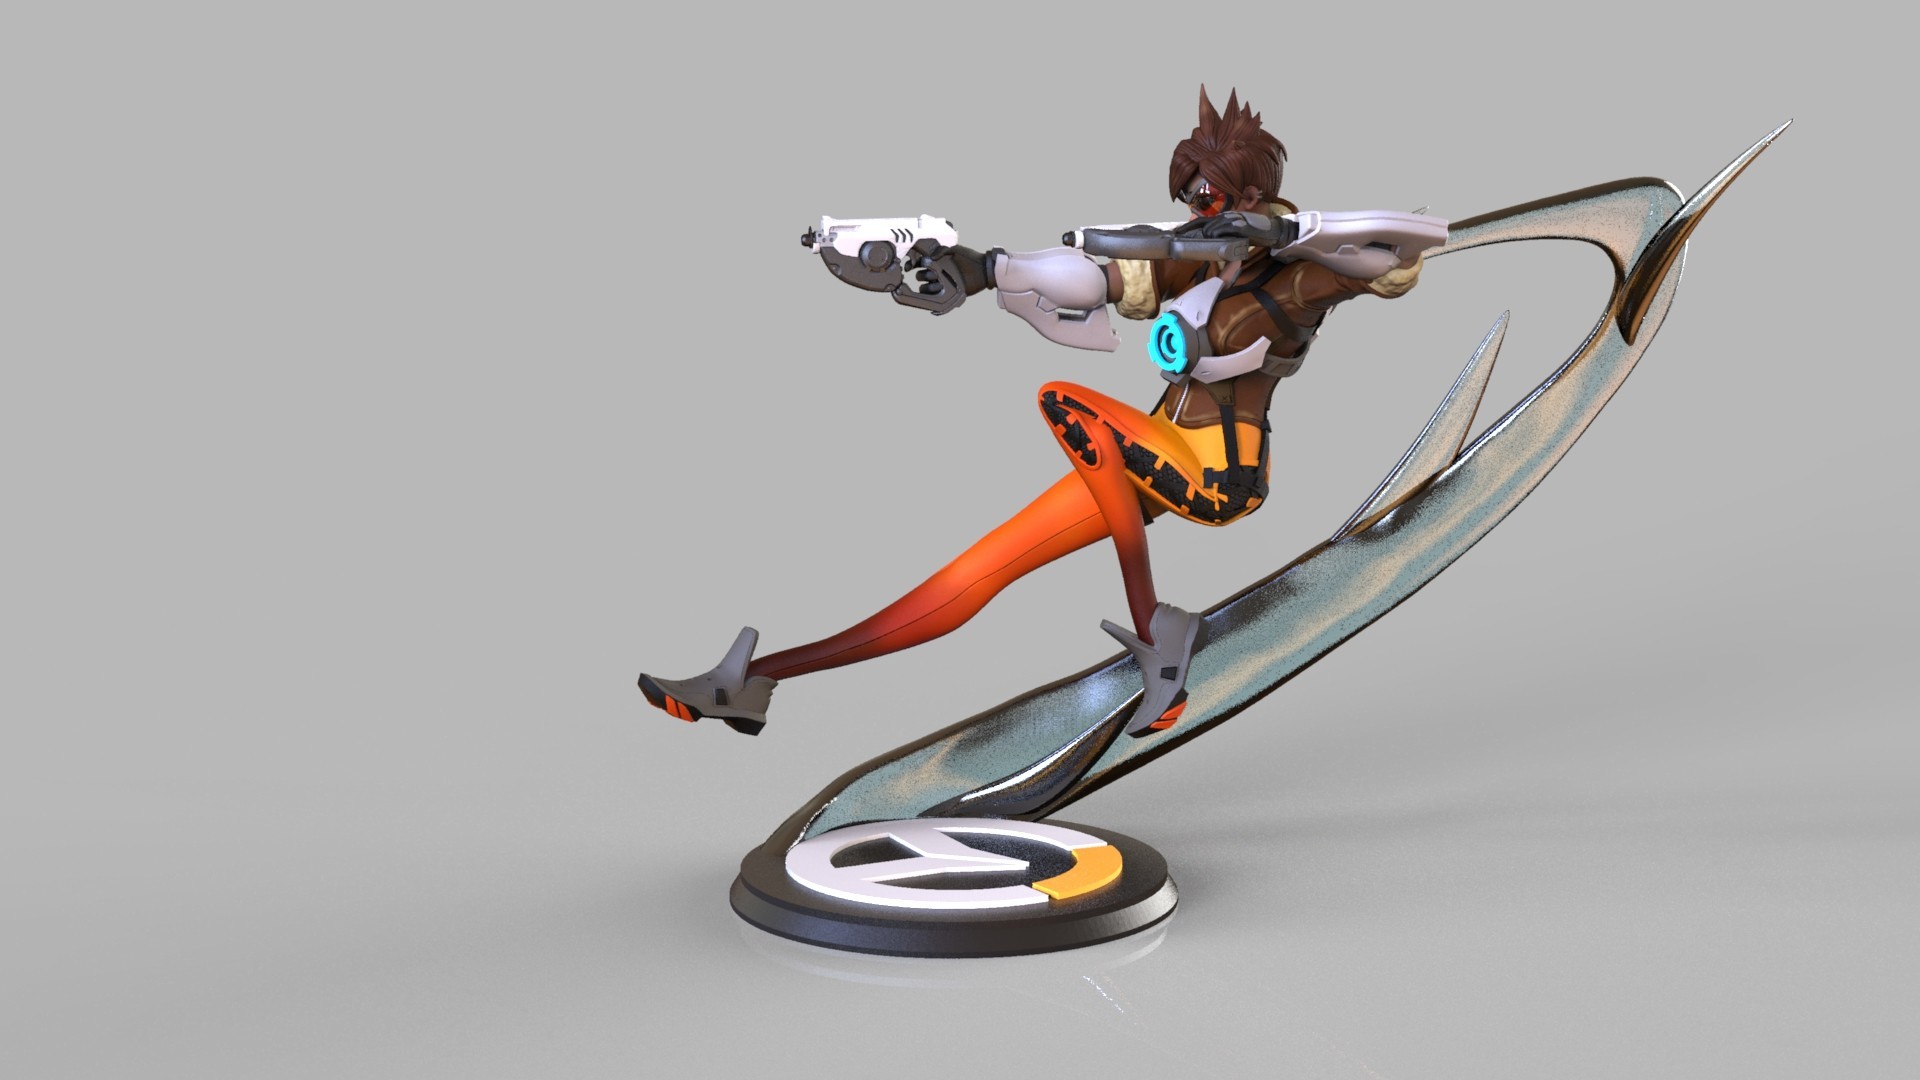 Tracer Custom Statue 1/3 1/4 fits Overwatch Painted Video Game Figure